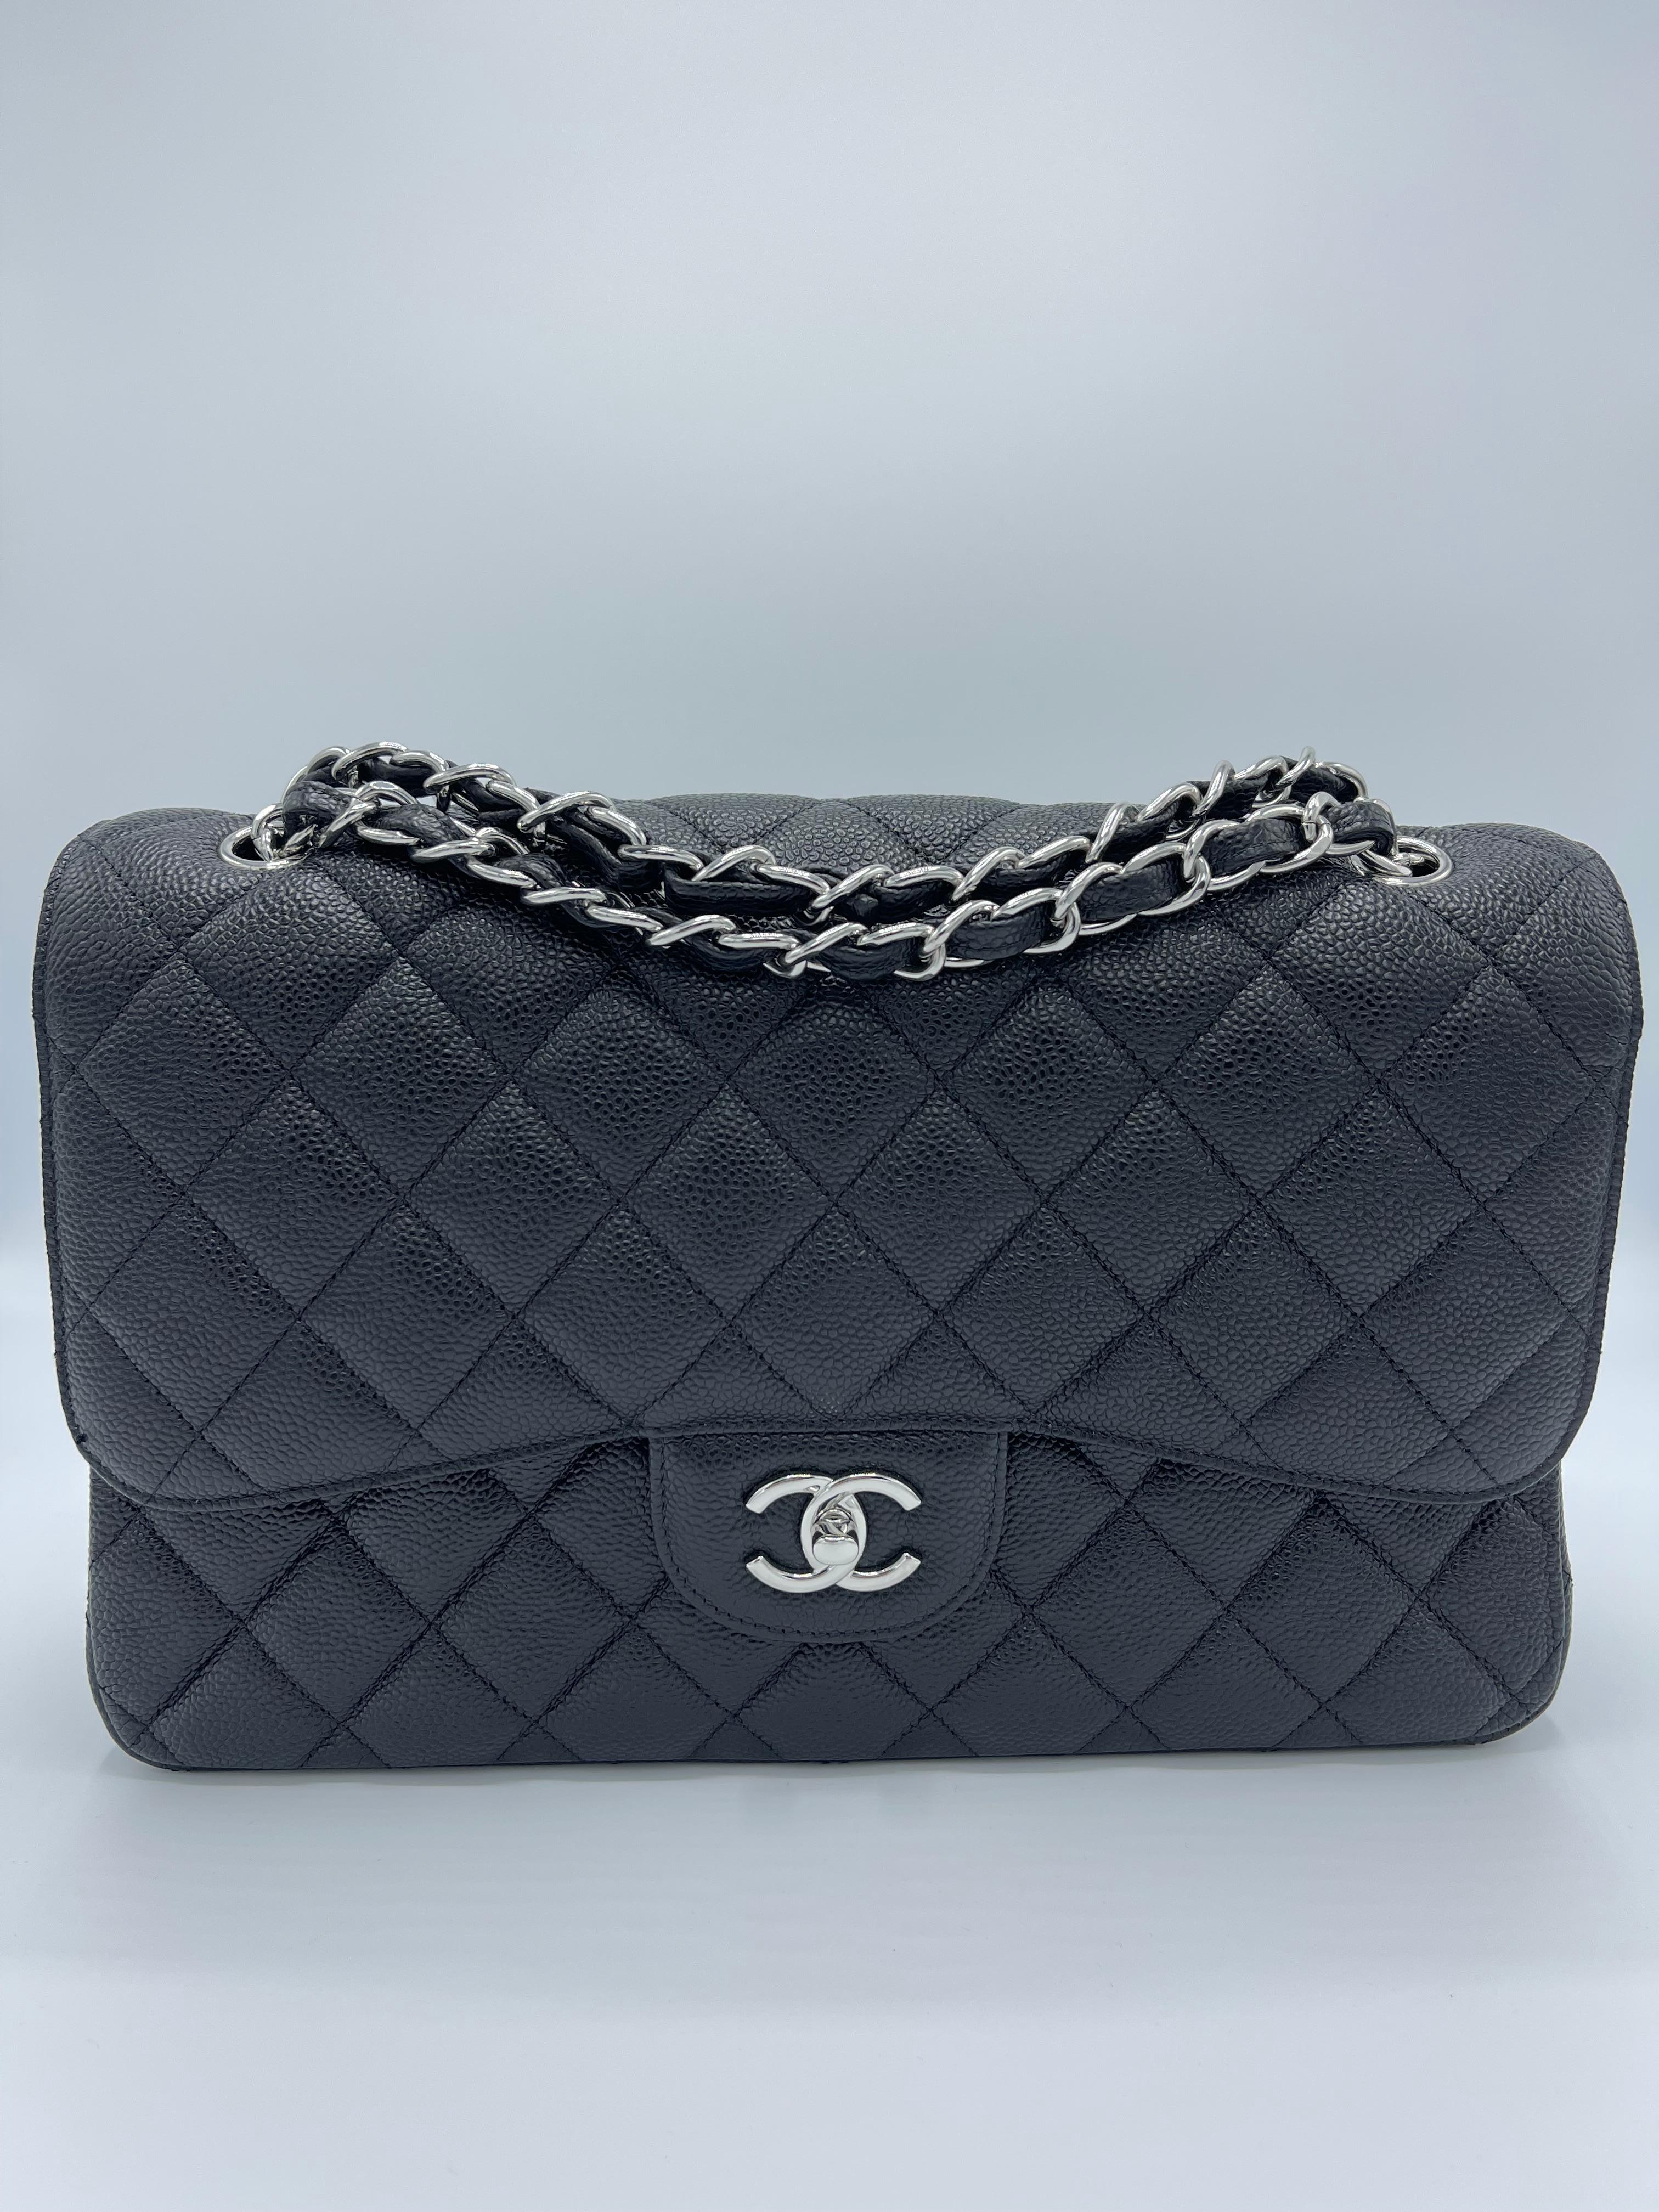 The famous Chanel Classic Double Flap new model shoulder bag is created in black grained Caviar leather and embellished with silvere turnlock and chain hardware from an early 2010 collection. 
The bag has a polished gold leather-threaded chain-link